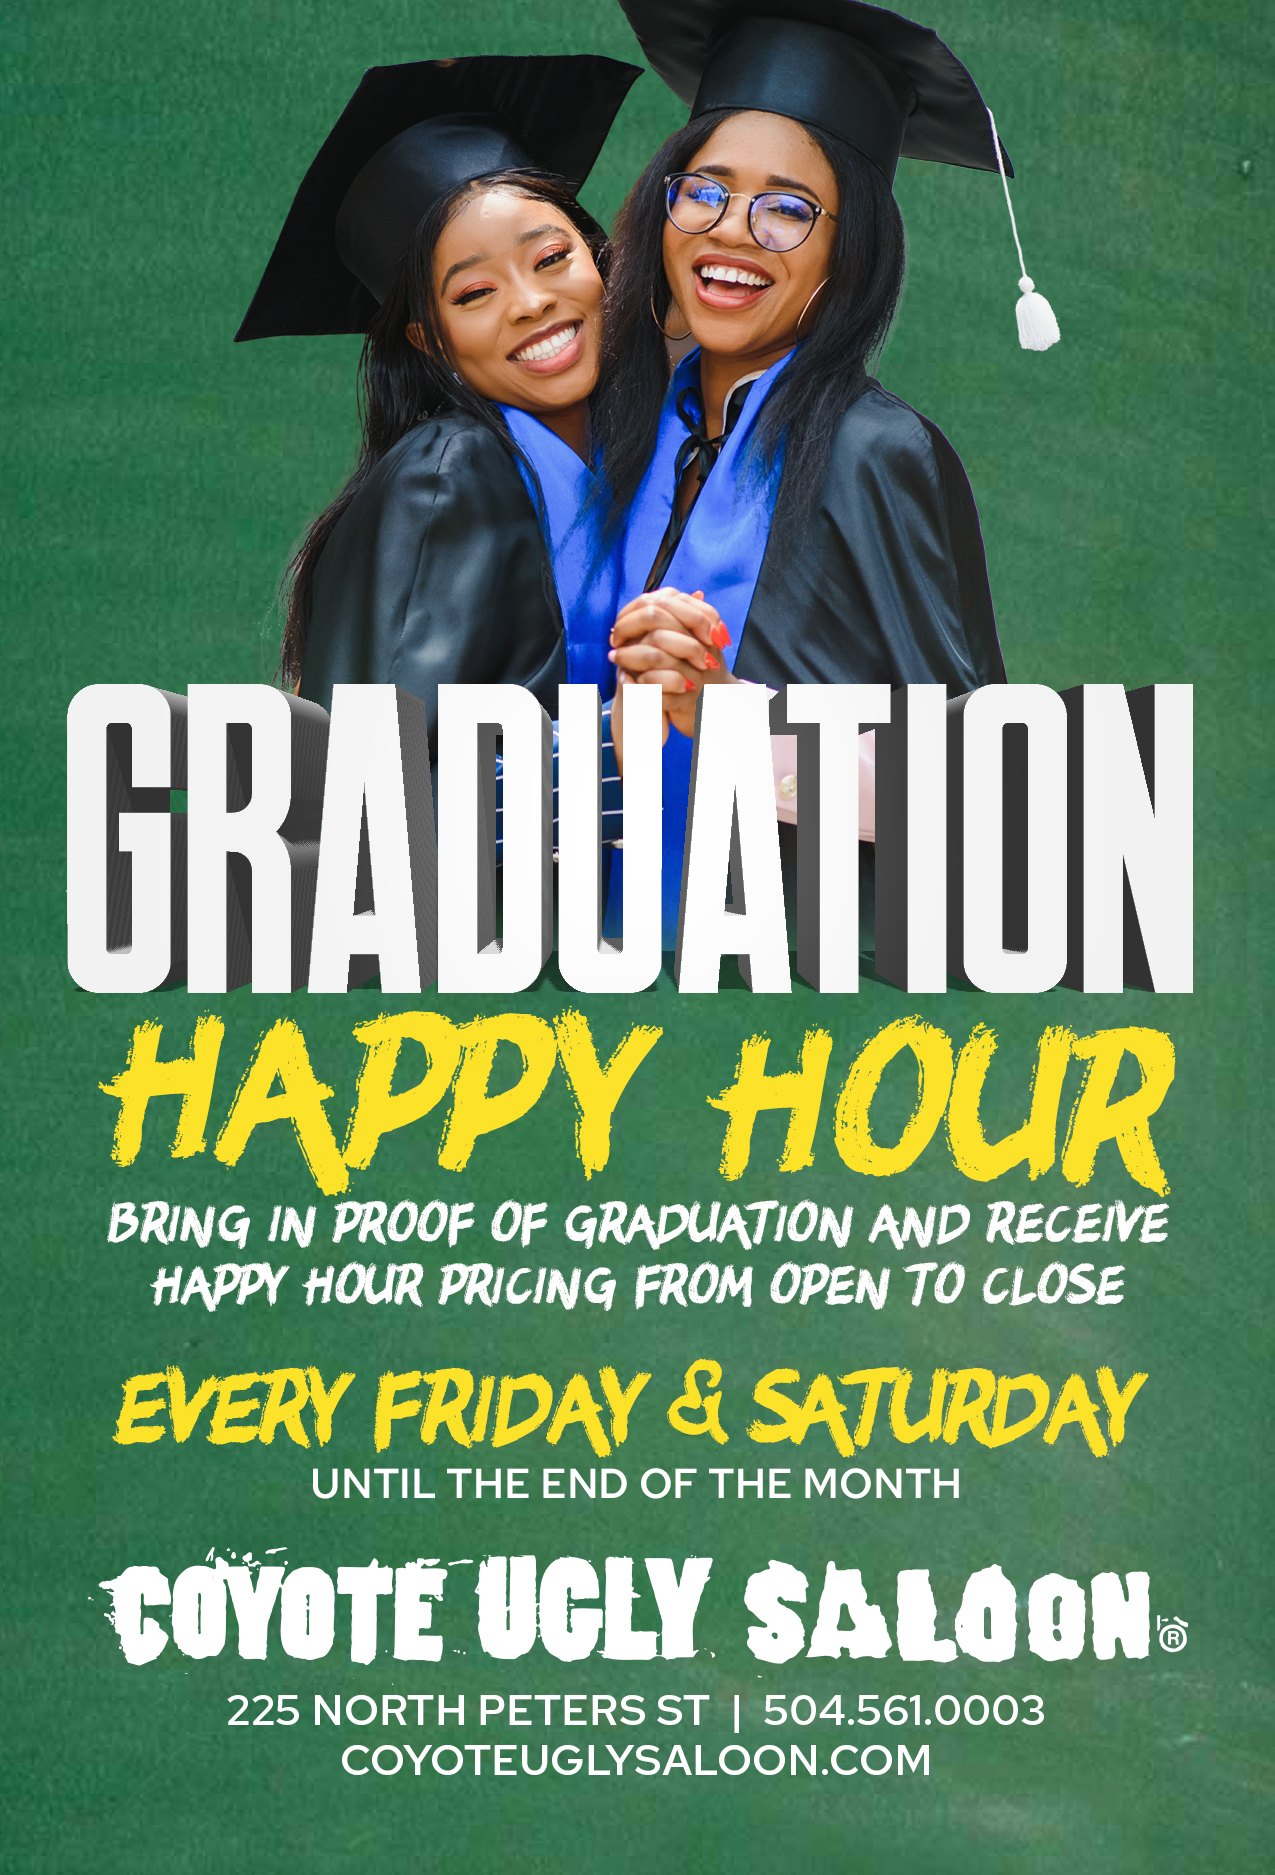 Graduation Happy Hour in New Orleans on May 14, 2022